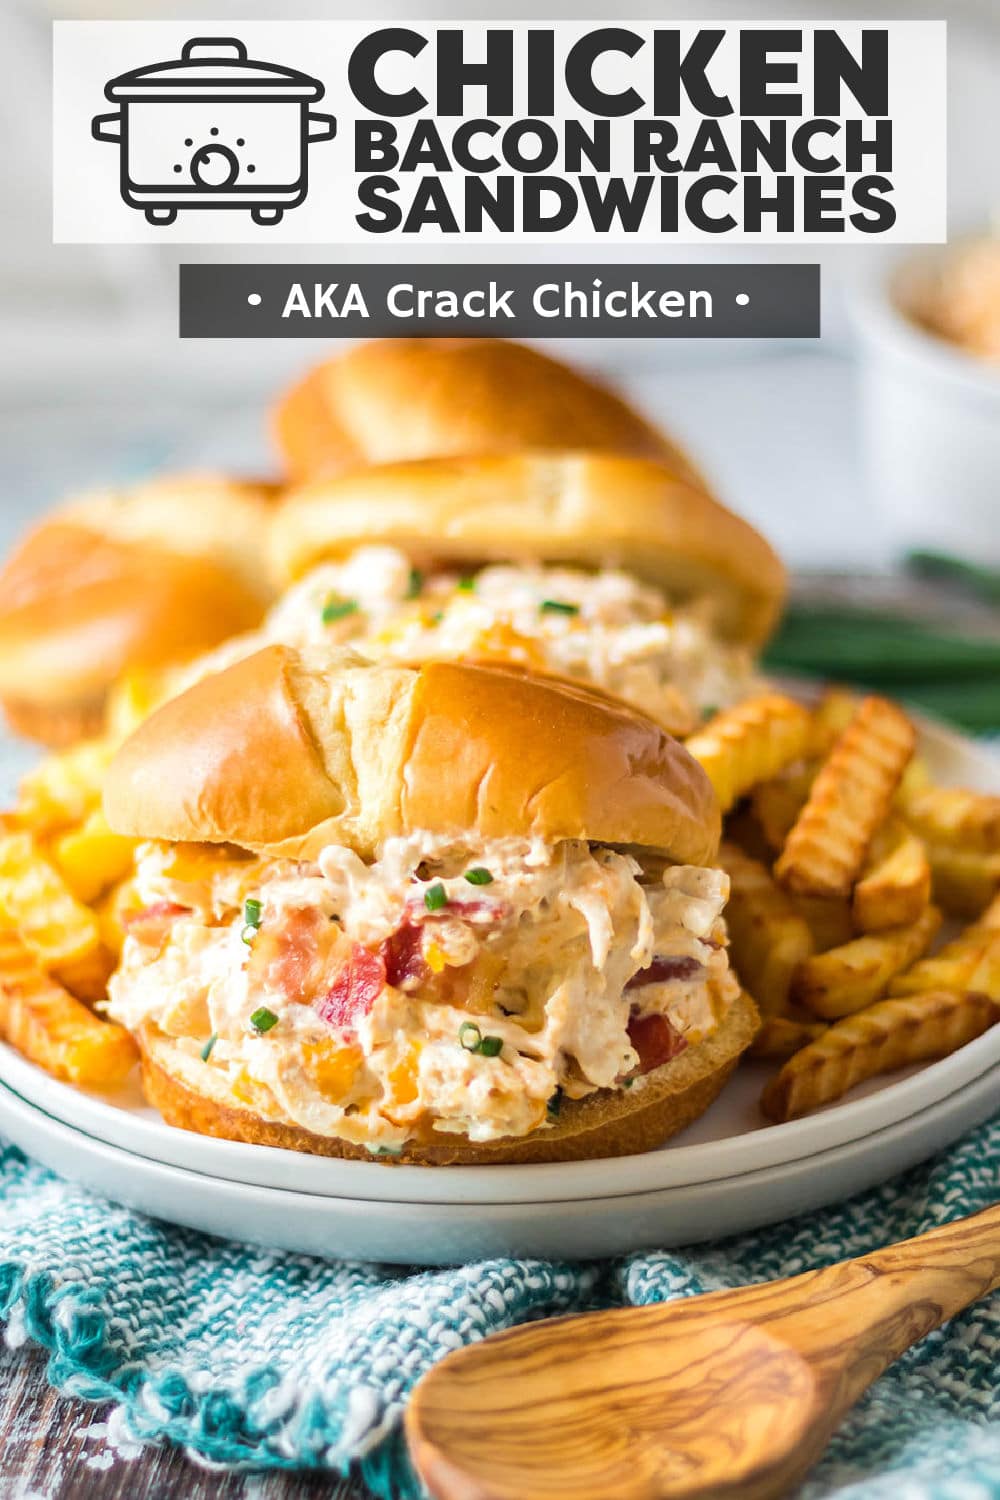 Slow Cooker Chicken Bacon Ranch Sandwiches (aka Crack Chicken) are an easy hit!  Chicken, cream cheese, and ranch seasoning cook together in the crockpot before getting mixed with cheddar, bacon, and scallions and then piled onto soft buns. | www.persnicketyplates.com